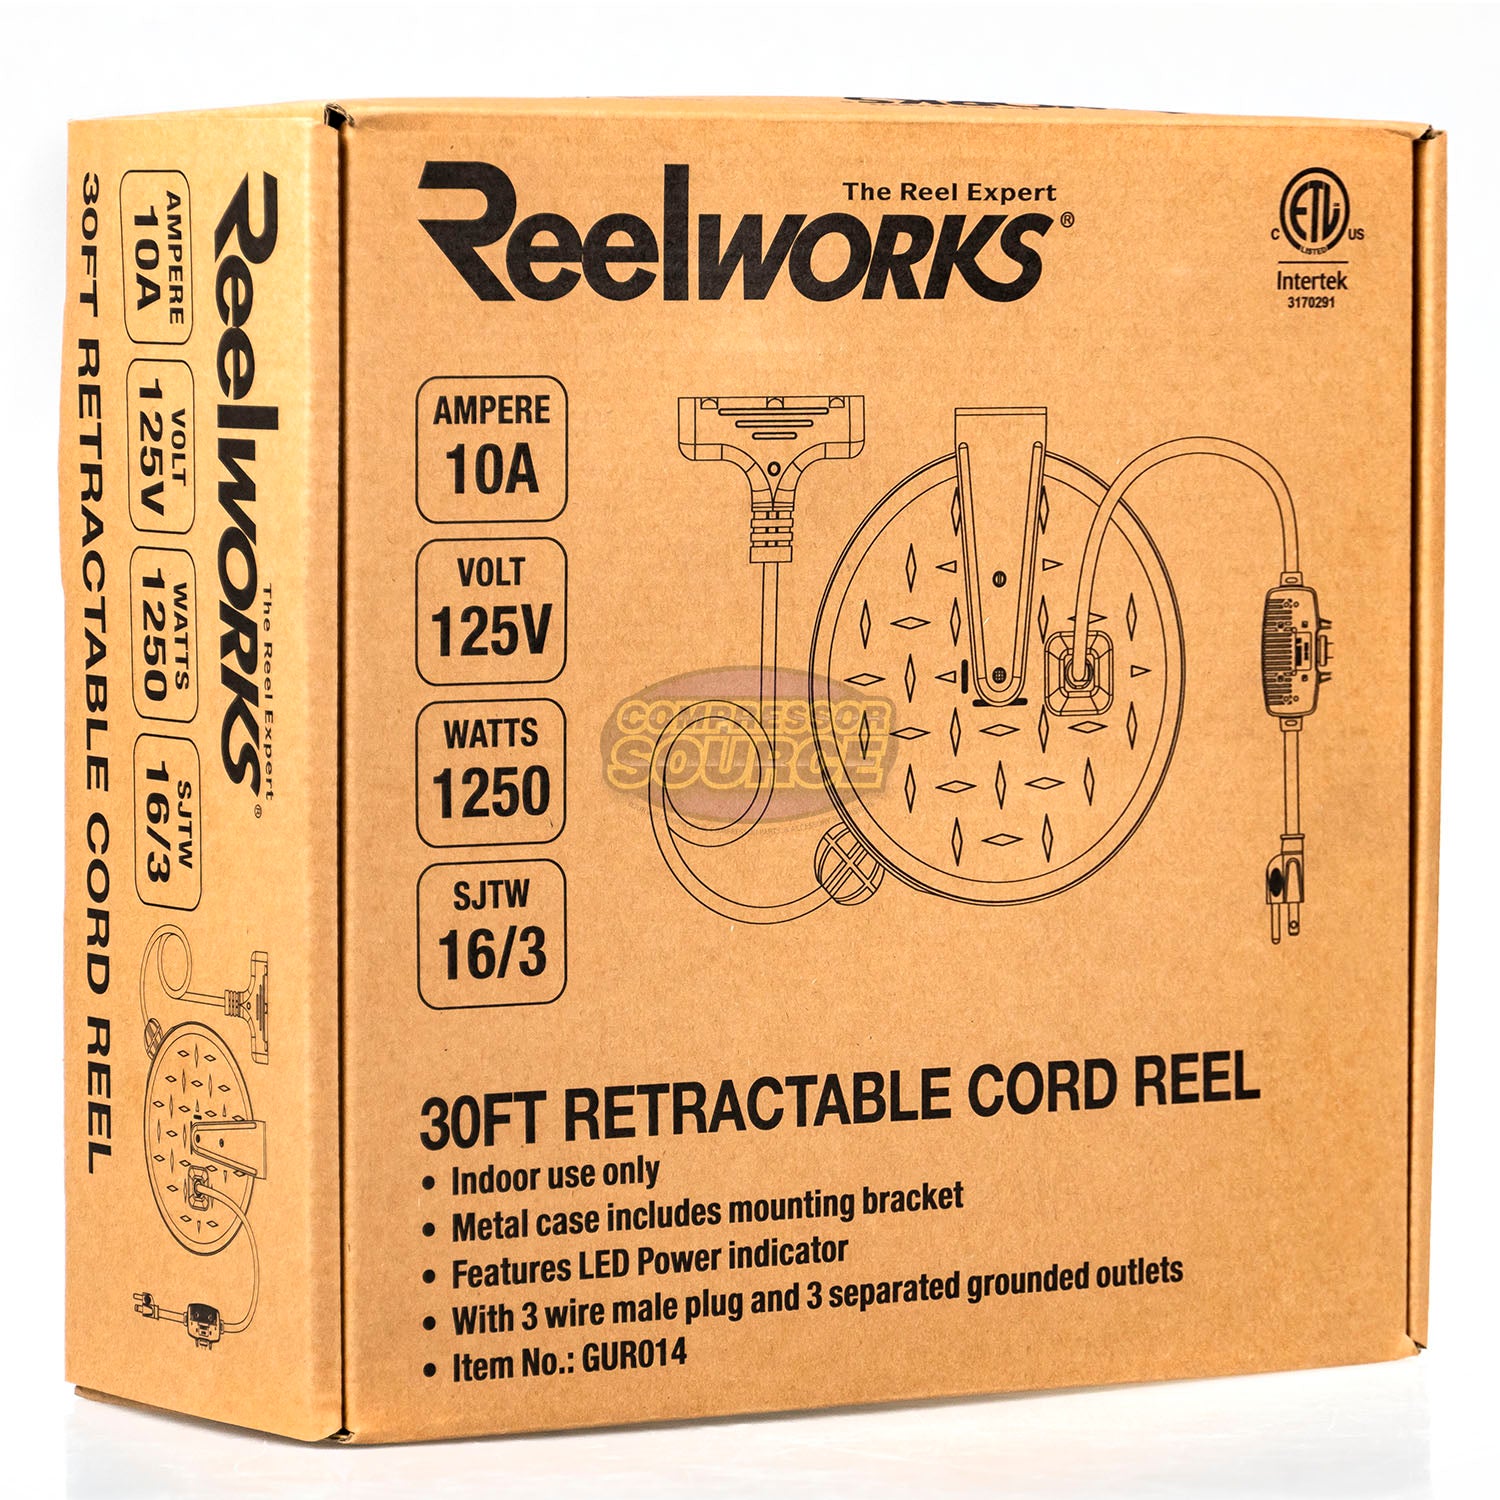 Reelworks 30 Ft Retractable Extension Cord Reel 3 Outlets 16/3